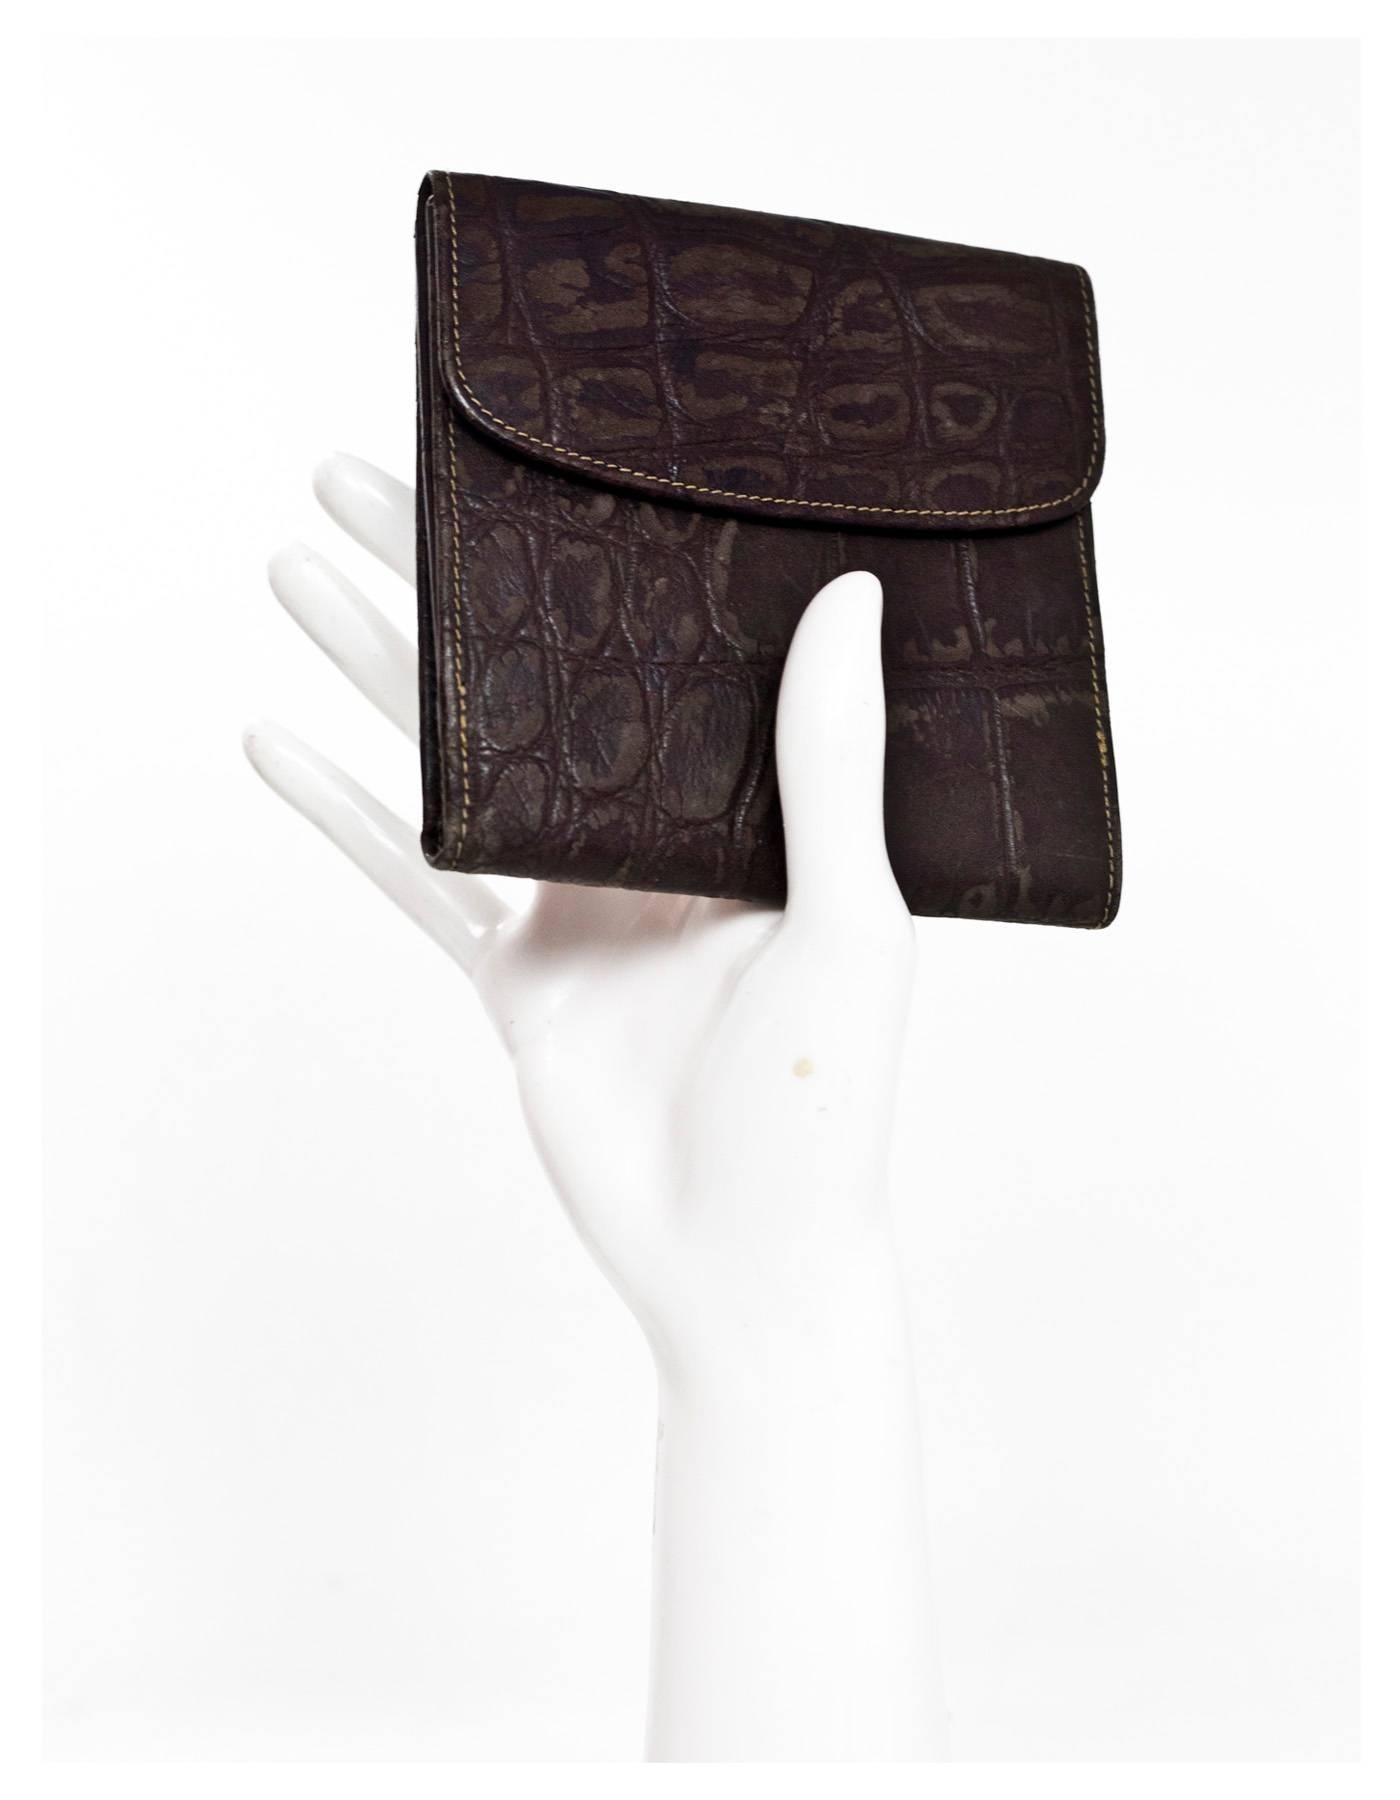 Fendi Vintage Brown Embossed Distressed Leather Wallet
Features embossed crocodile print

Made In: Italy
Color: Brown
Materials: Distressed leather
Lining: Embossed leather
Closure/Opening: Side snap closure
Exterior Pockets: None
Interior Pockets: